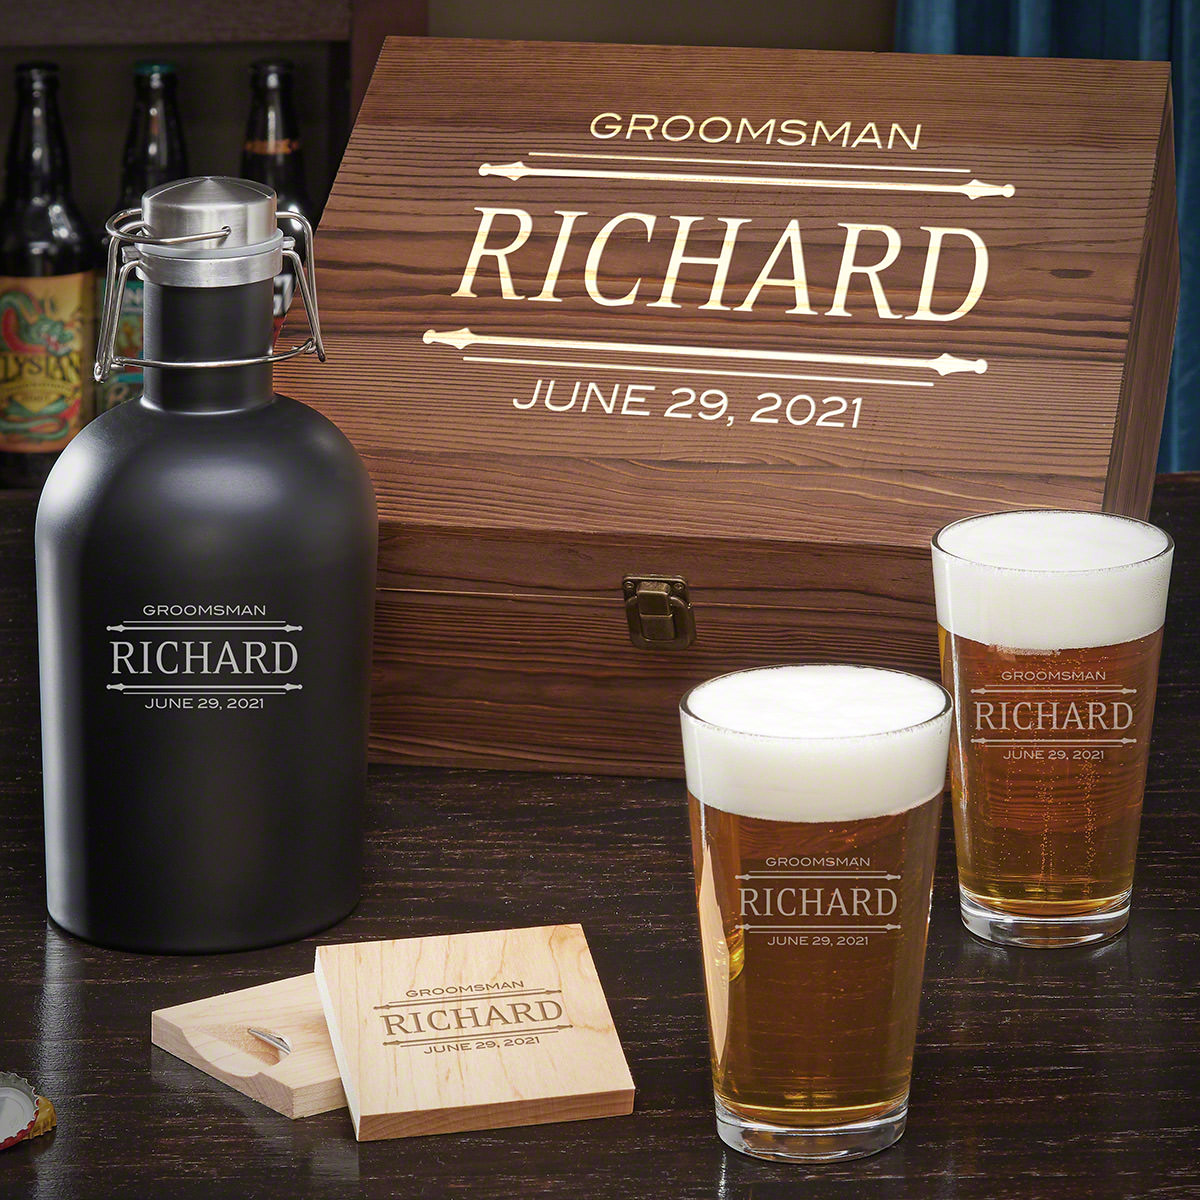 Stanford Personalized Beer Gift Set